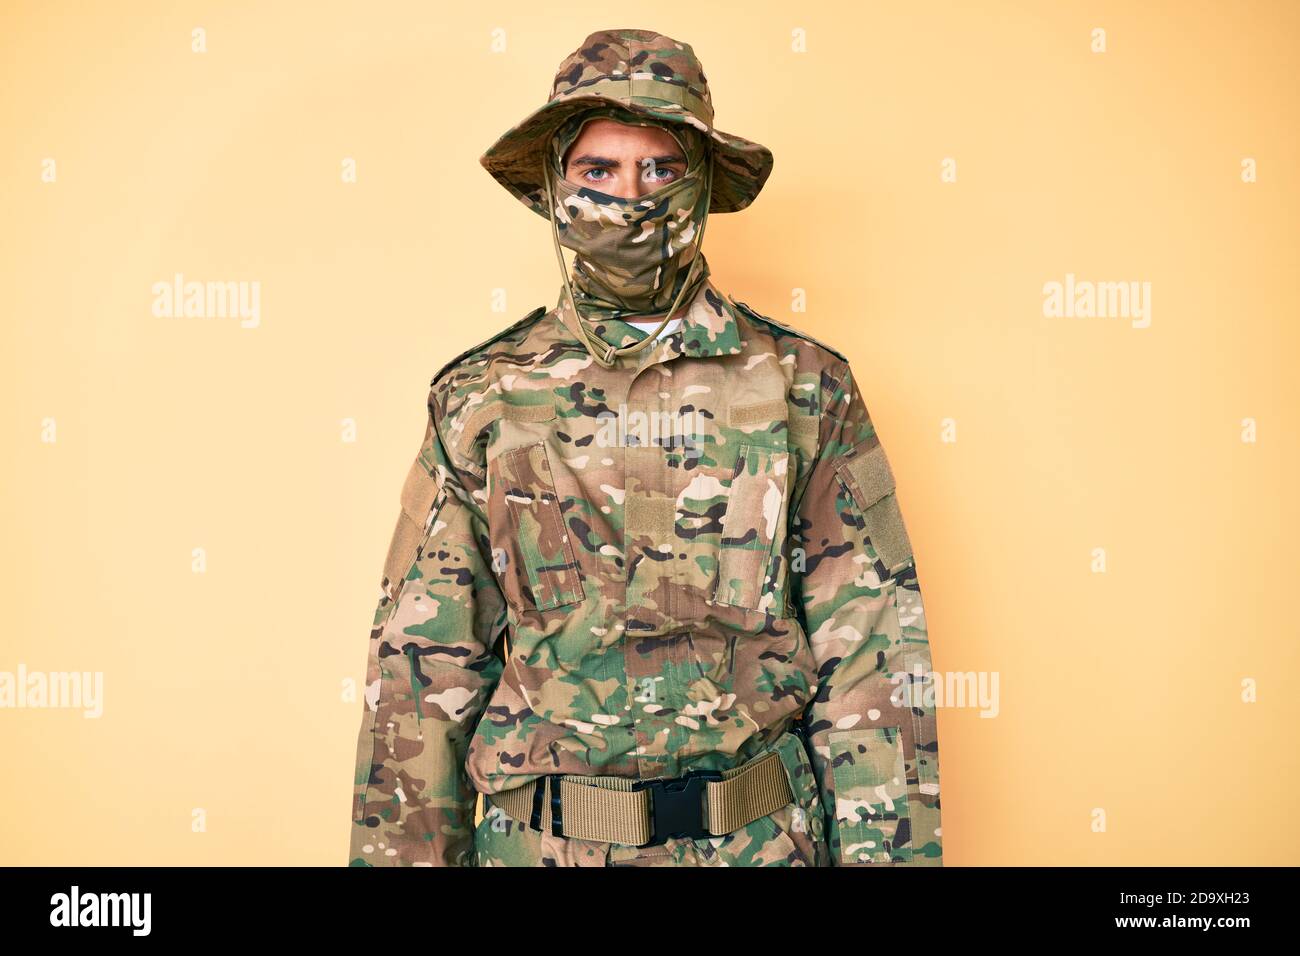 Young handsome man wearing camouflage army uniform and balaclava with ...